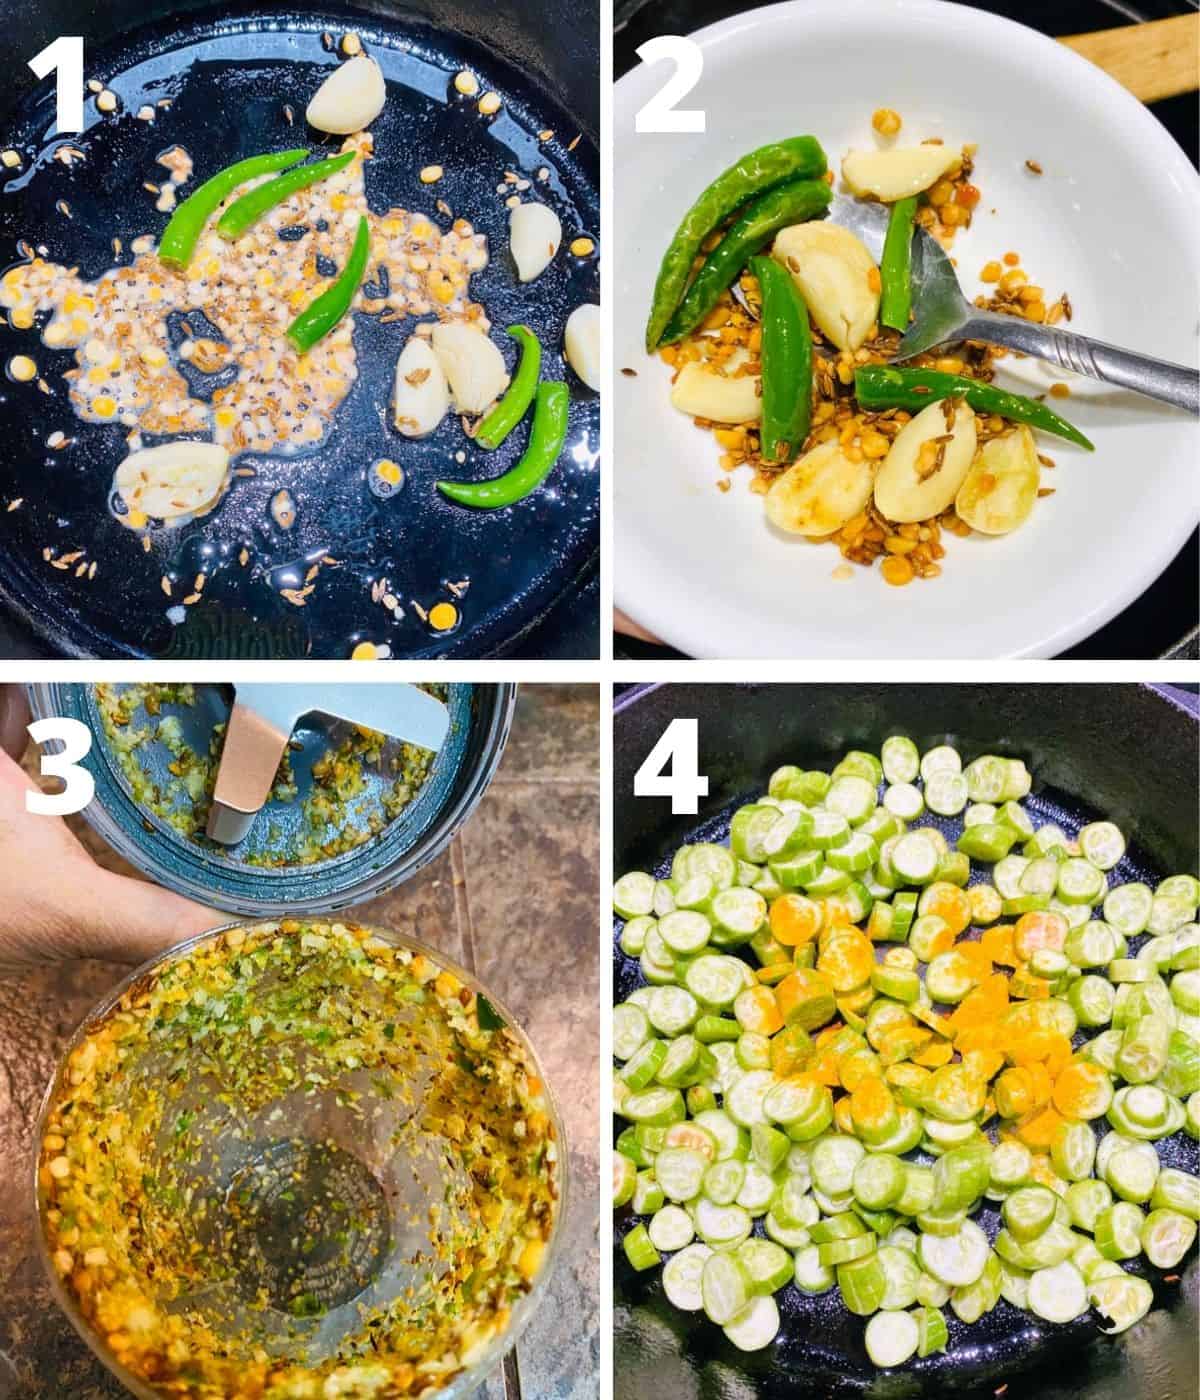 This is a collage image of step by step pictures to show how to make tindora chutney recipe.